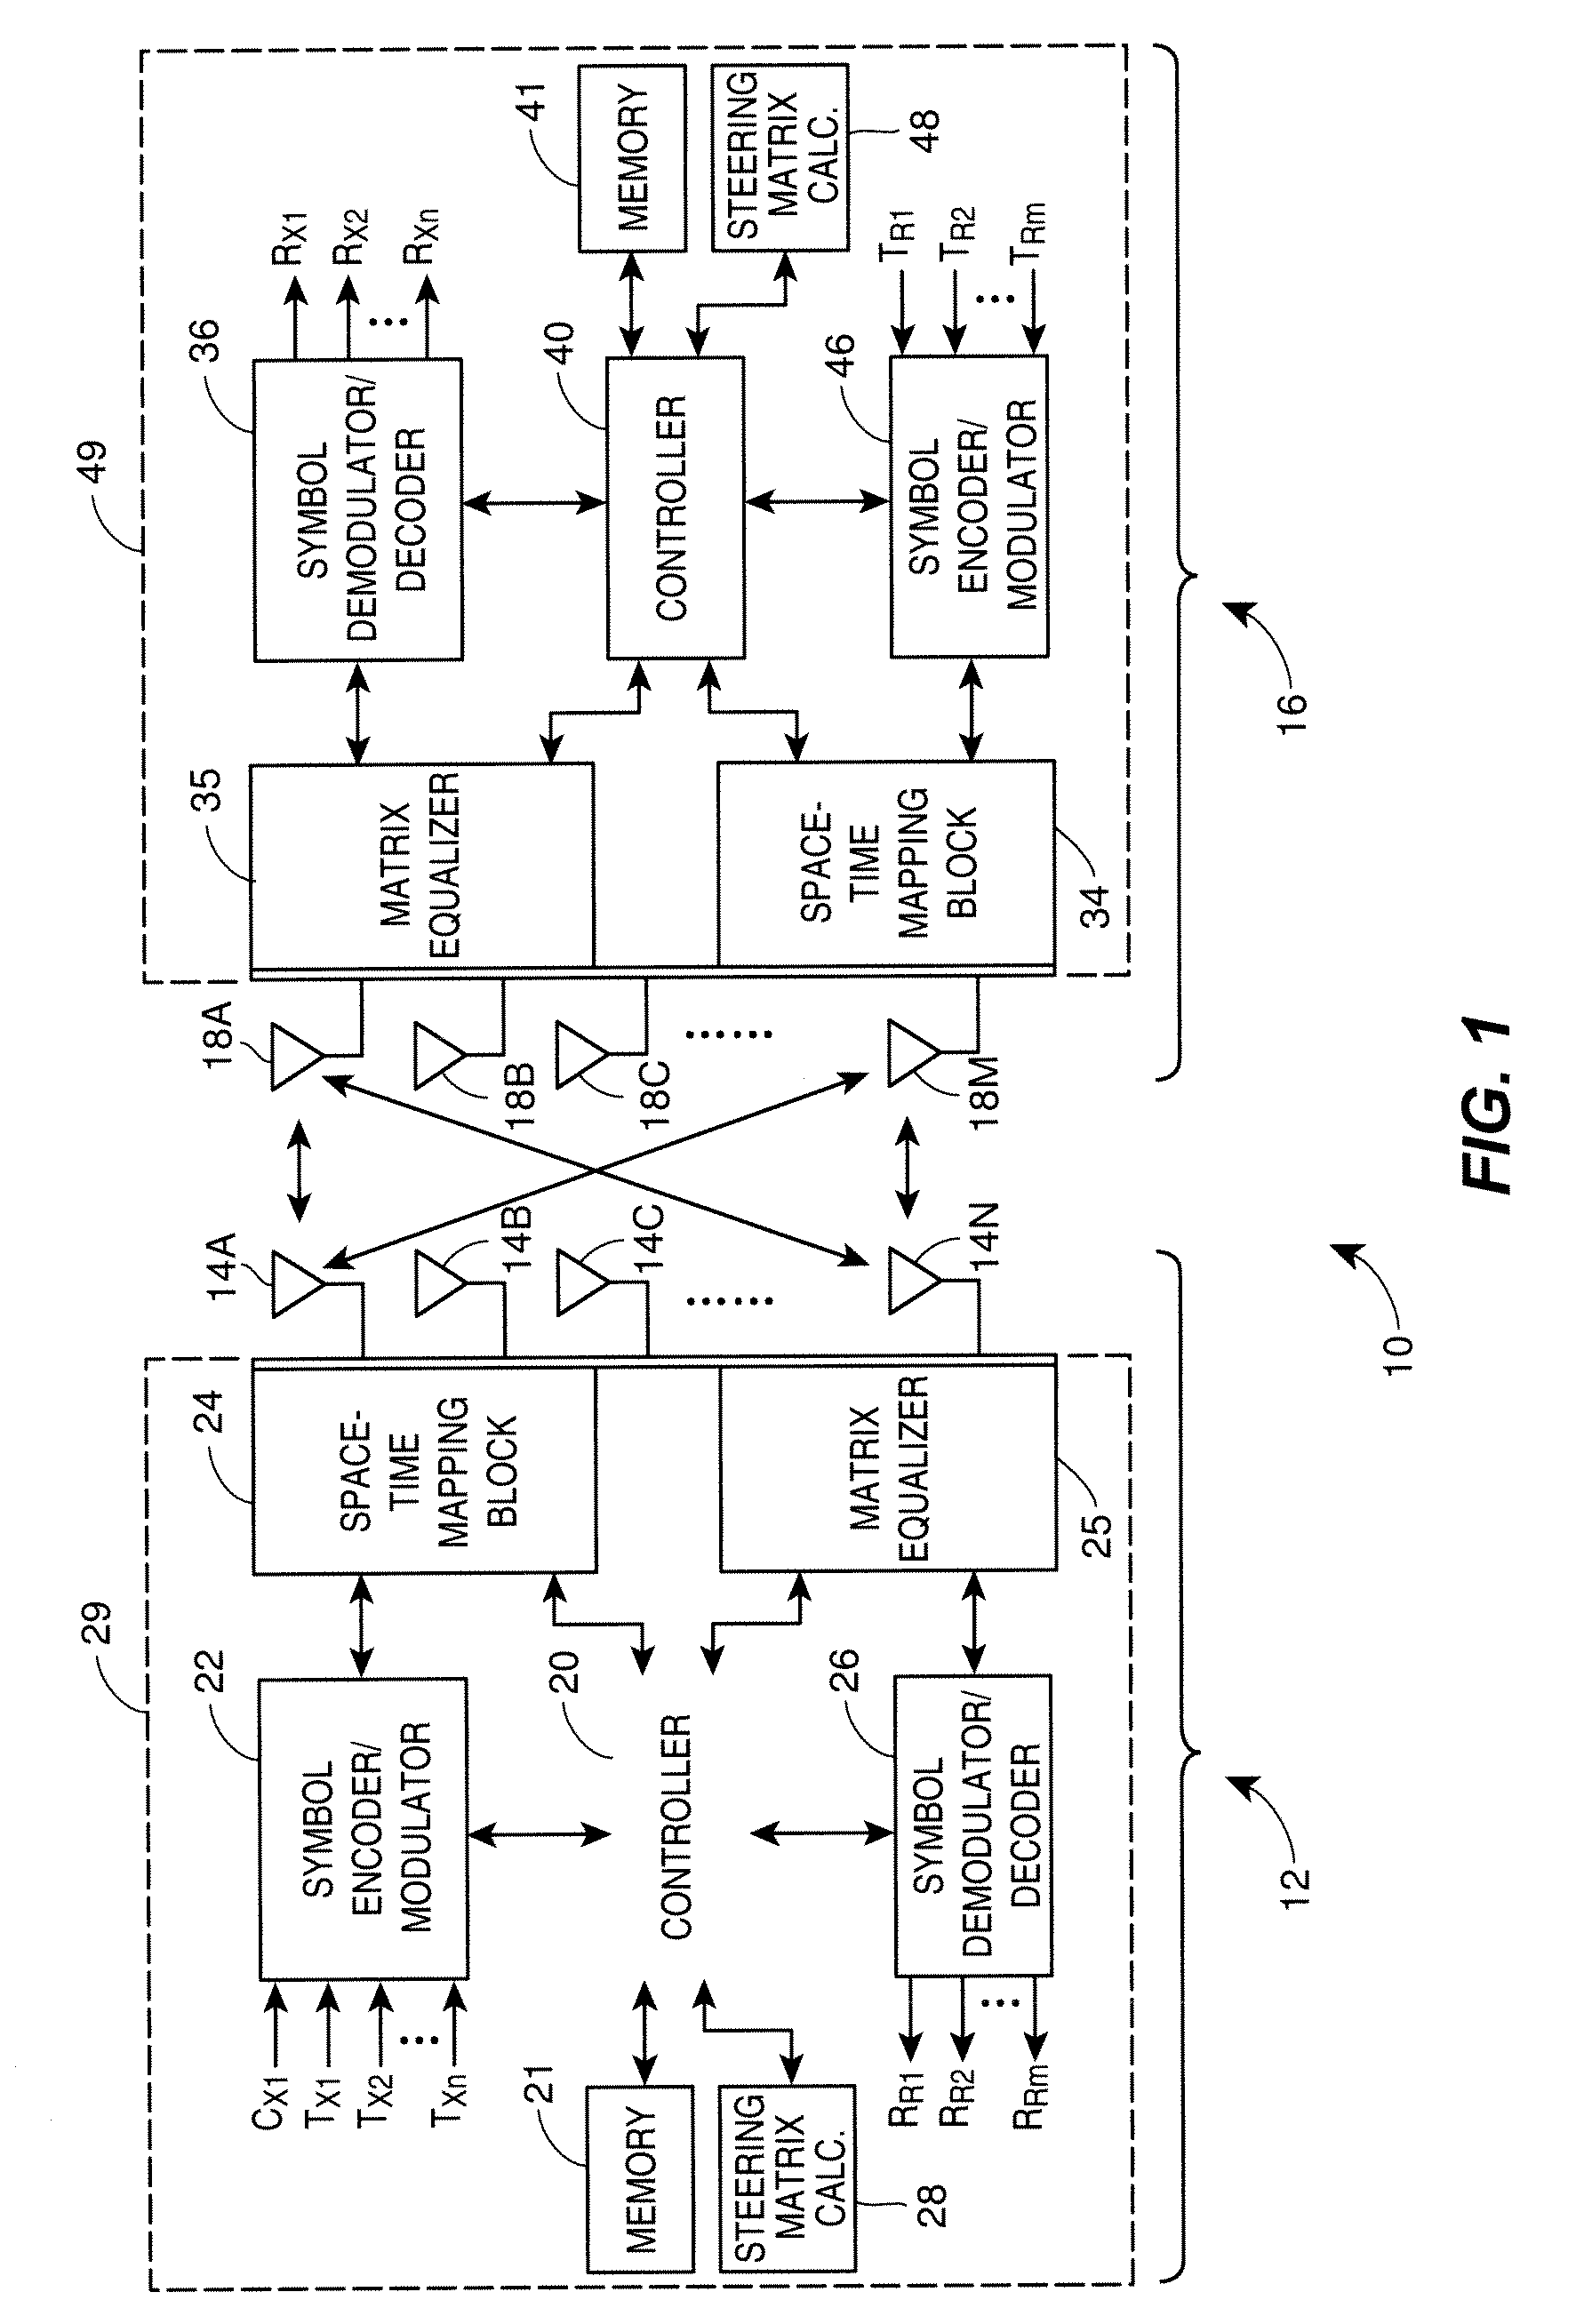 Reuse of a matrix equalizer for the purpose of transmit beamforming in a wireless MIMO communication system